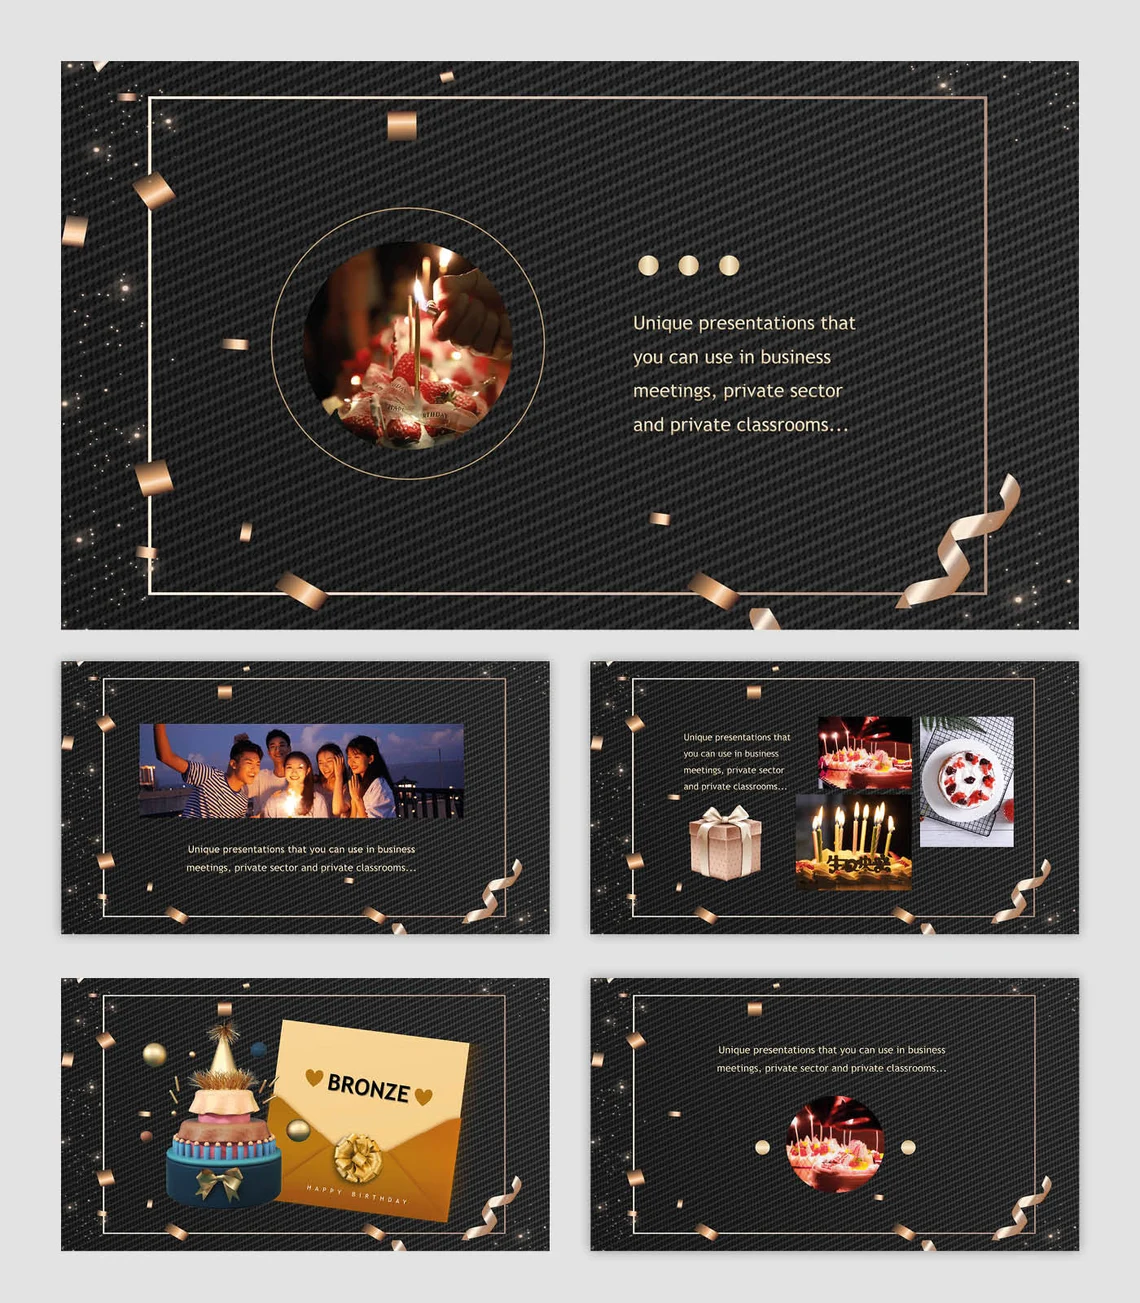 A set of 5 different birthday party events powerpoint templates in black, beige and white on a gray background.